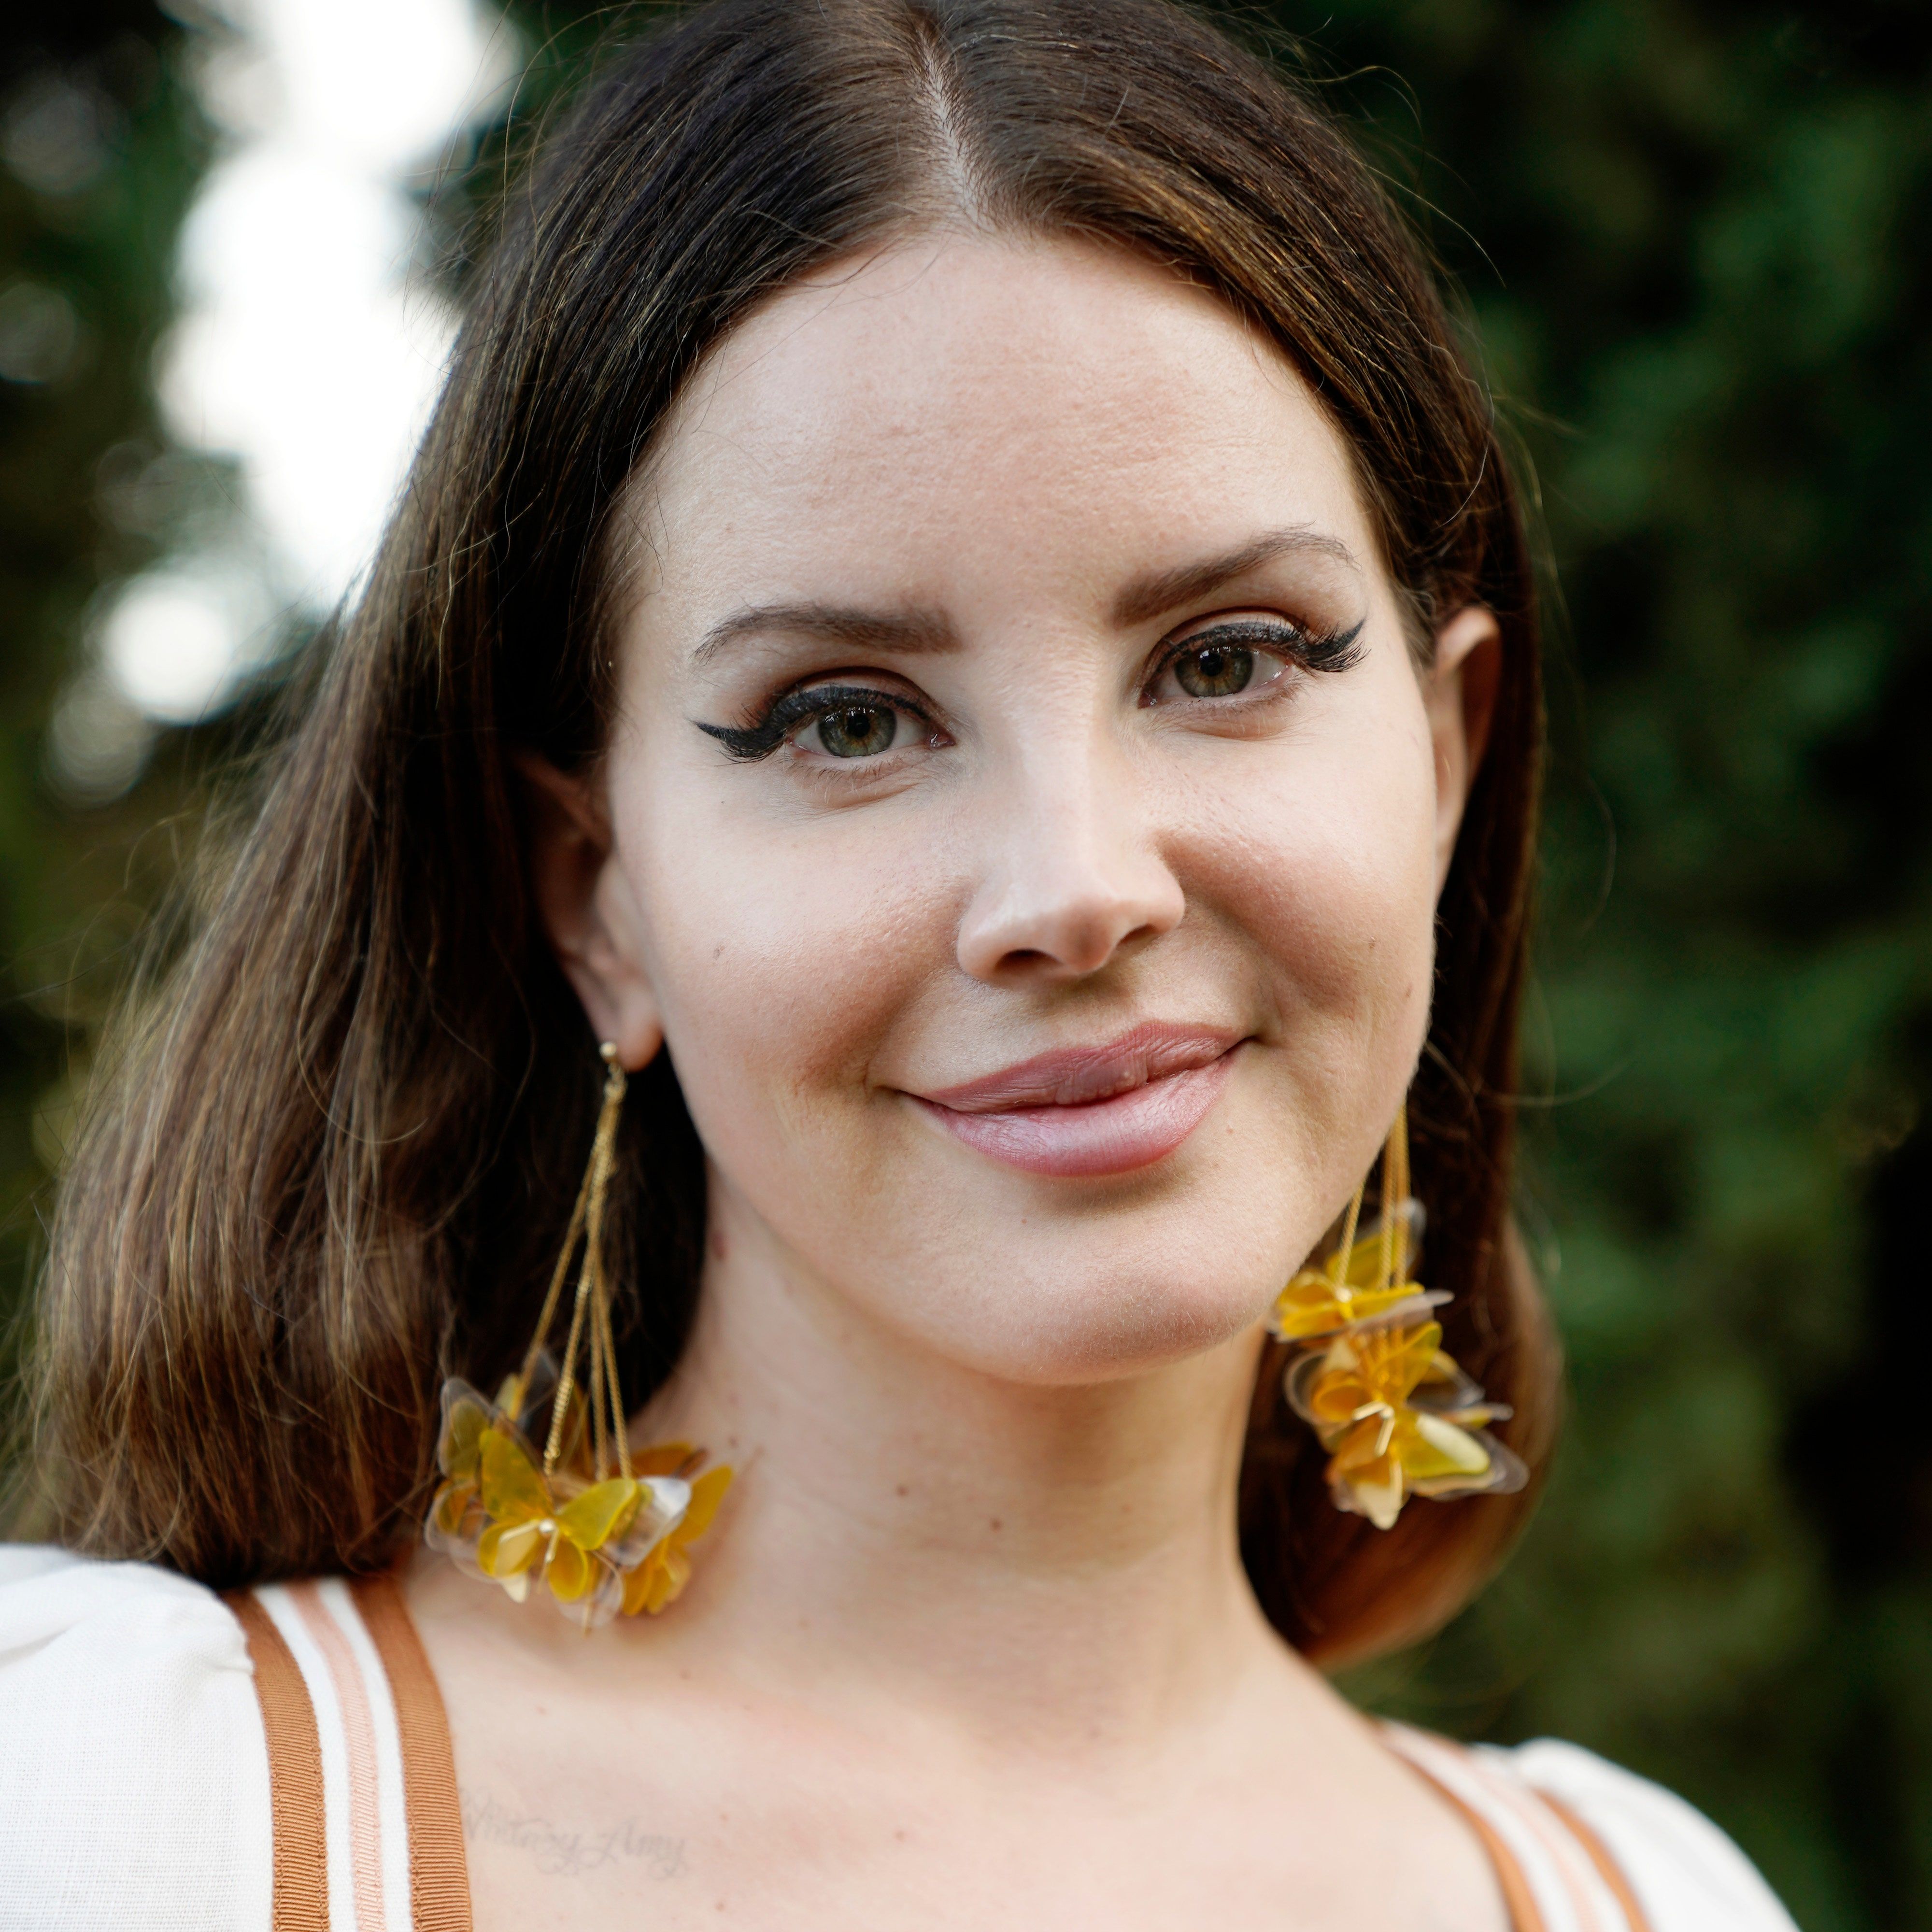 Lana Del Rey's Instagram Post Is a Classic White Feminism Trap